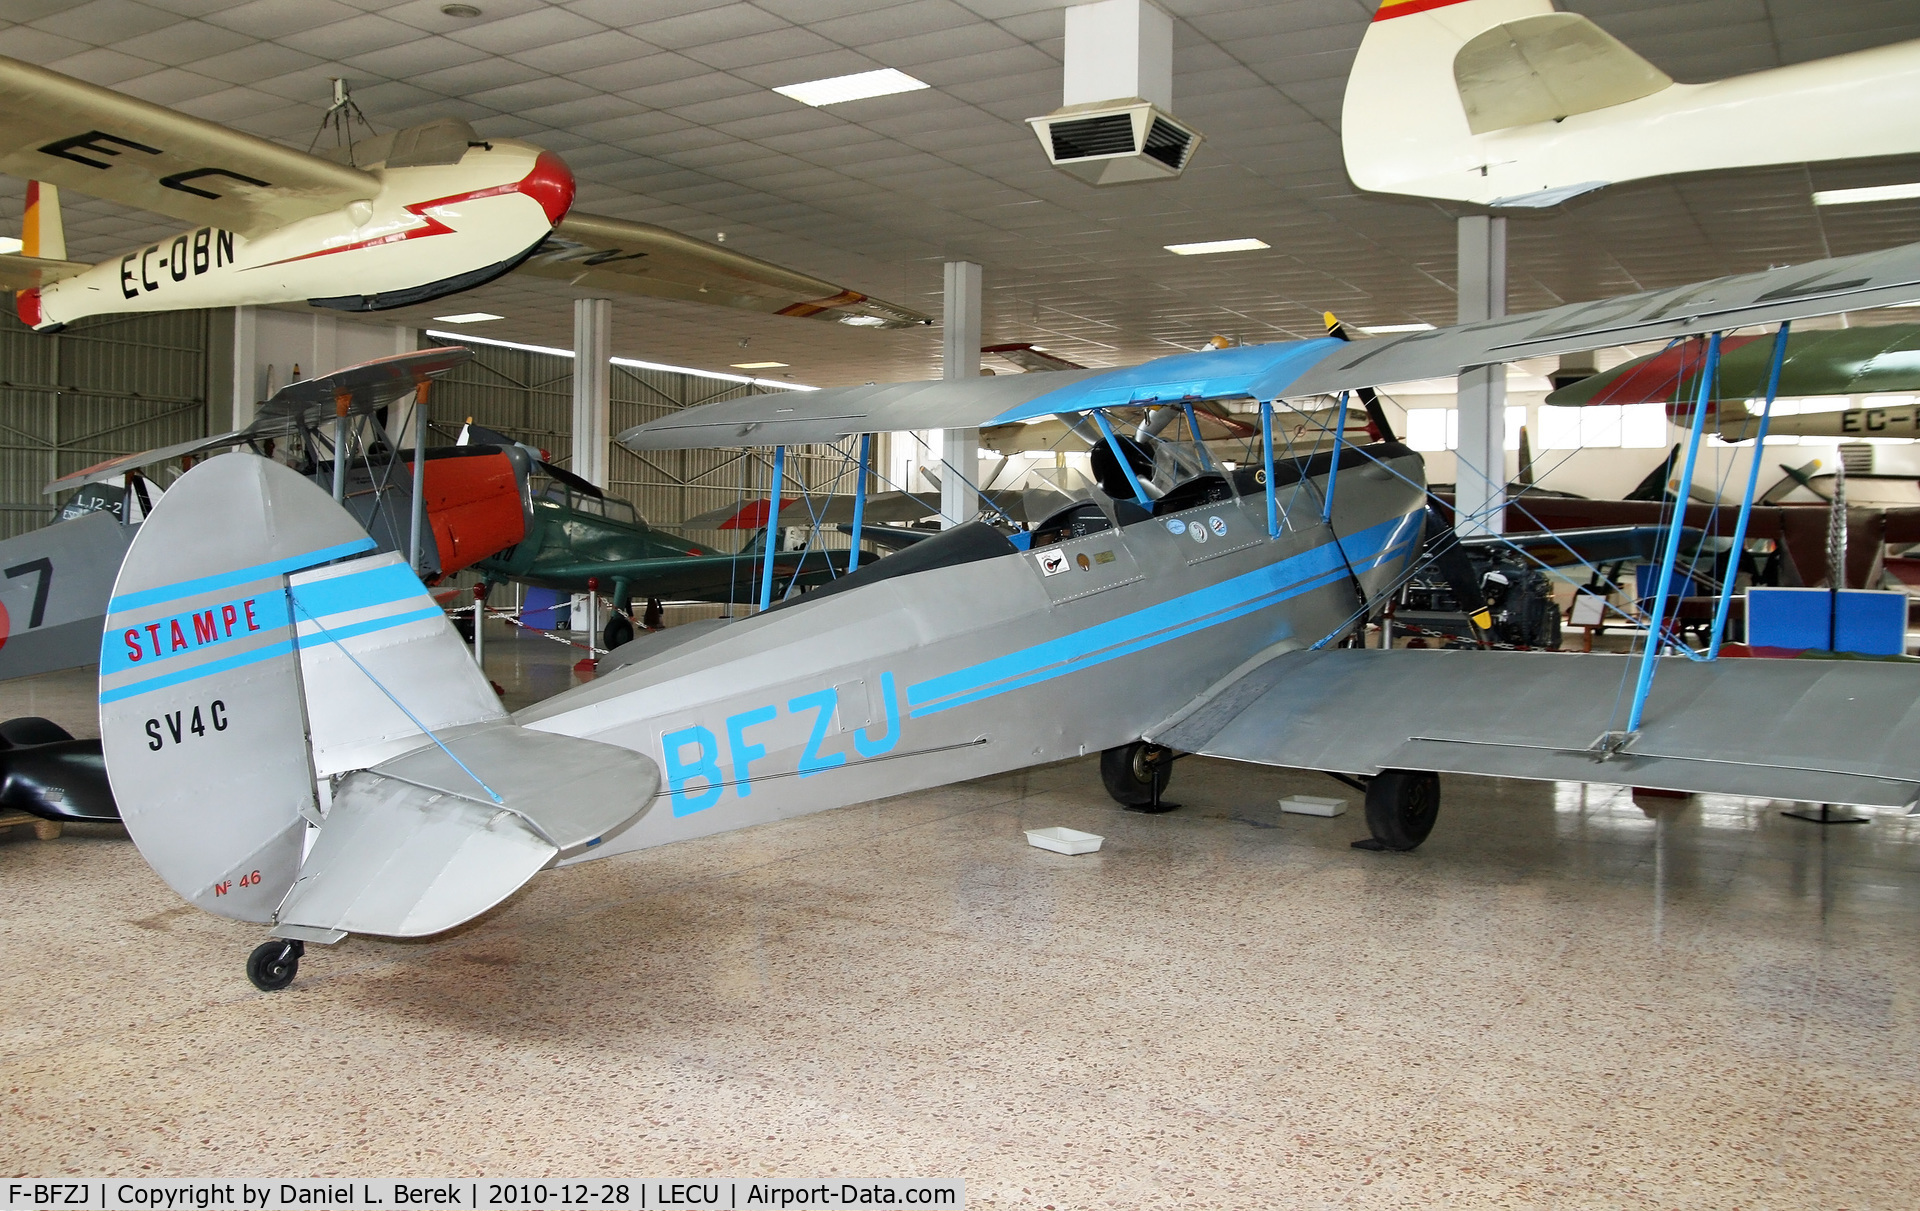 F-BFZJ, Stampe-Vertongen SV-4C C/N 46, Pretty French-registered Belgian biplane on display at the Museo del Aire, Cuatro Vientos, Madrid.